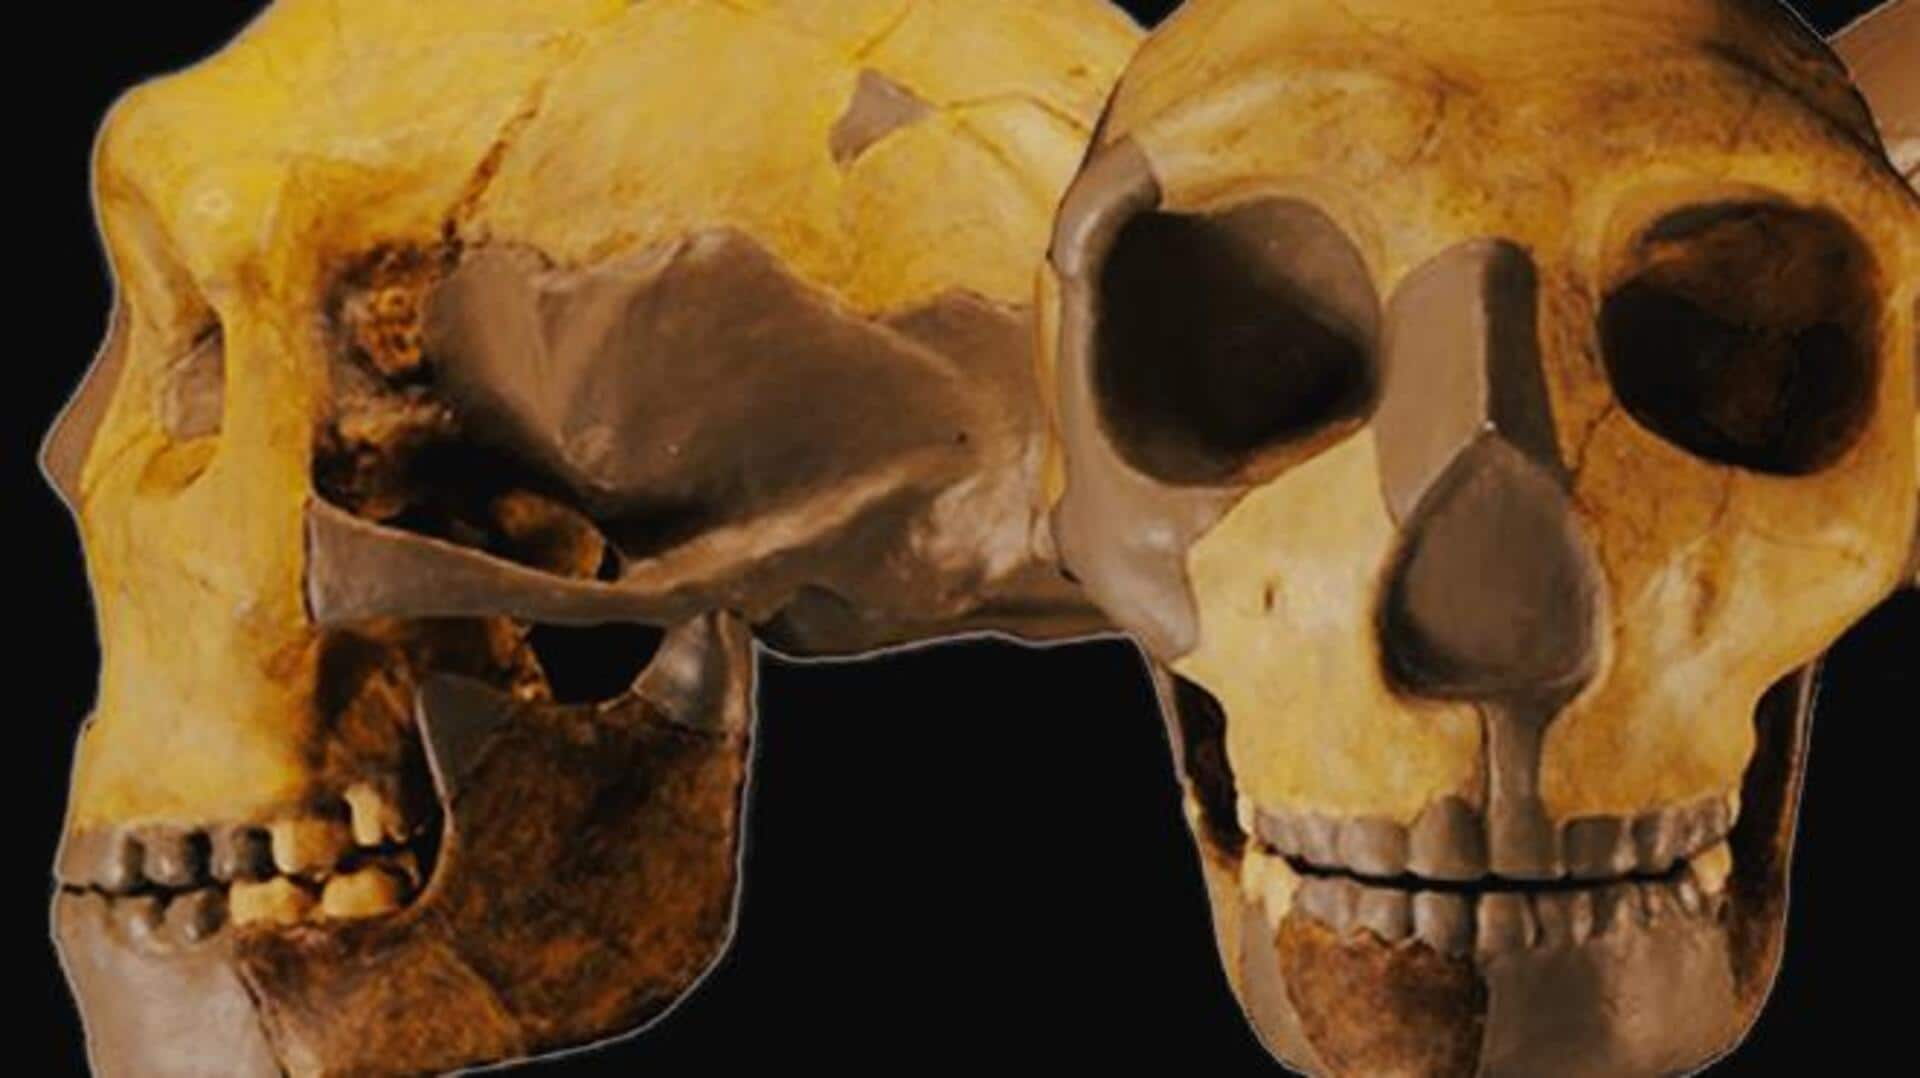 Mysterious fossil found in China complicates understanding of human evolution